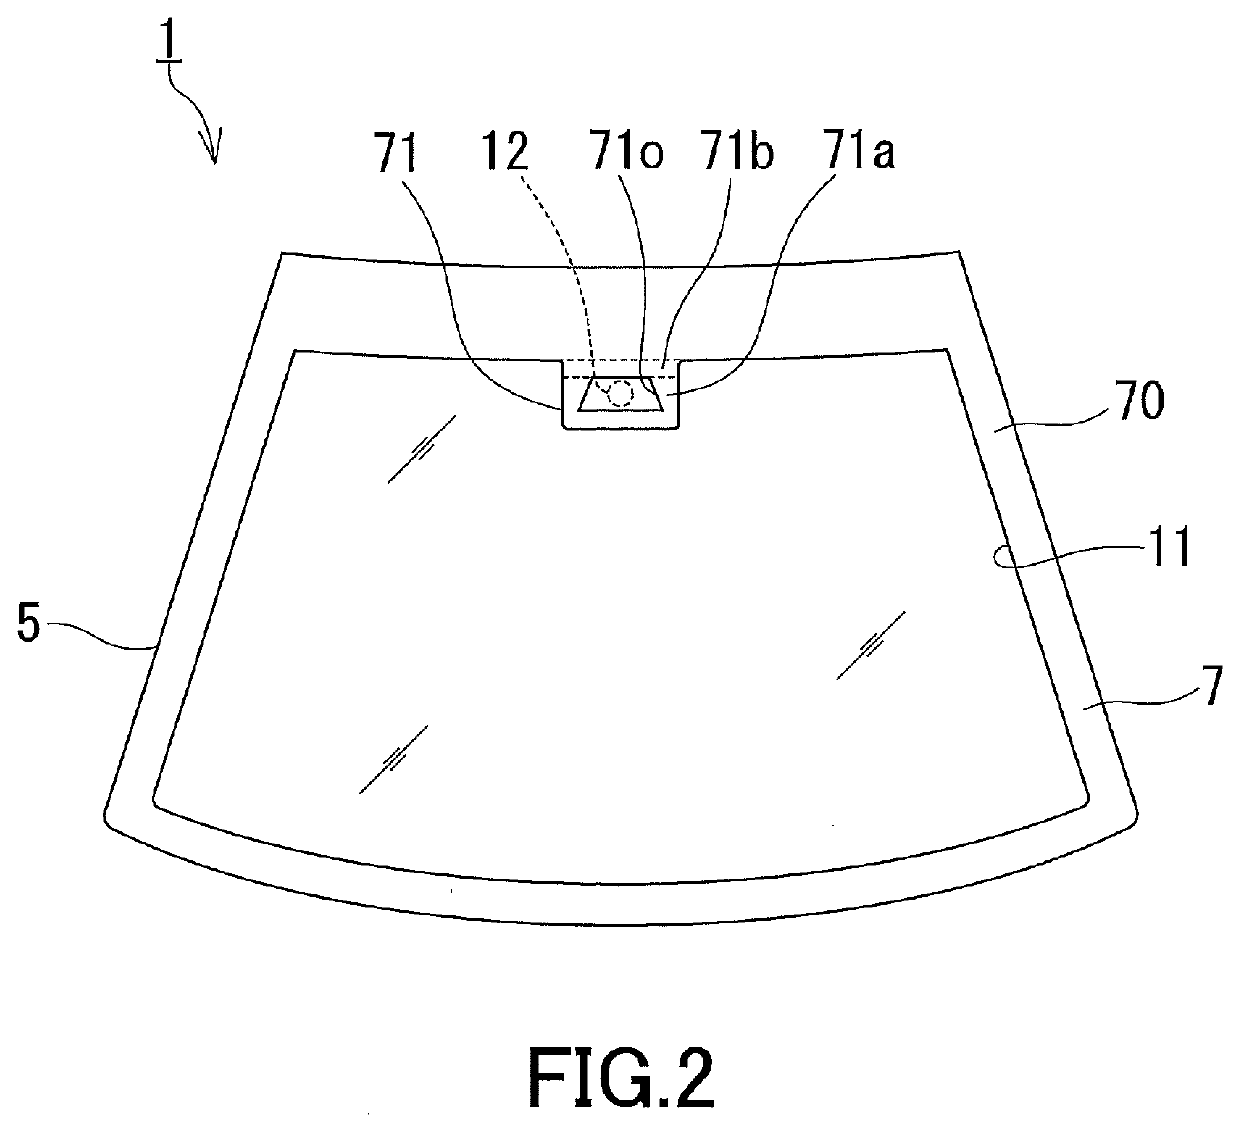 Windshield, glass product for windshield, and Anti-fogging member